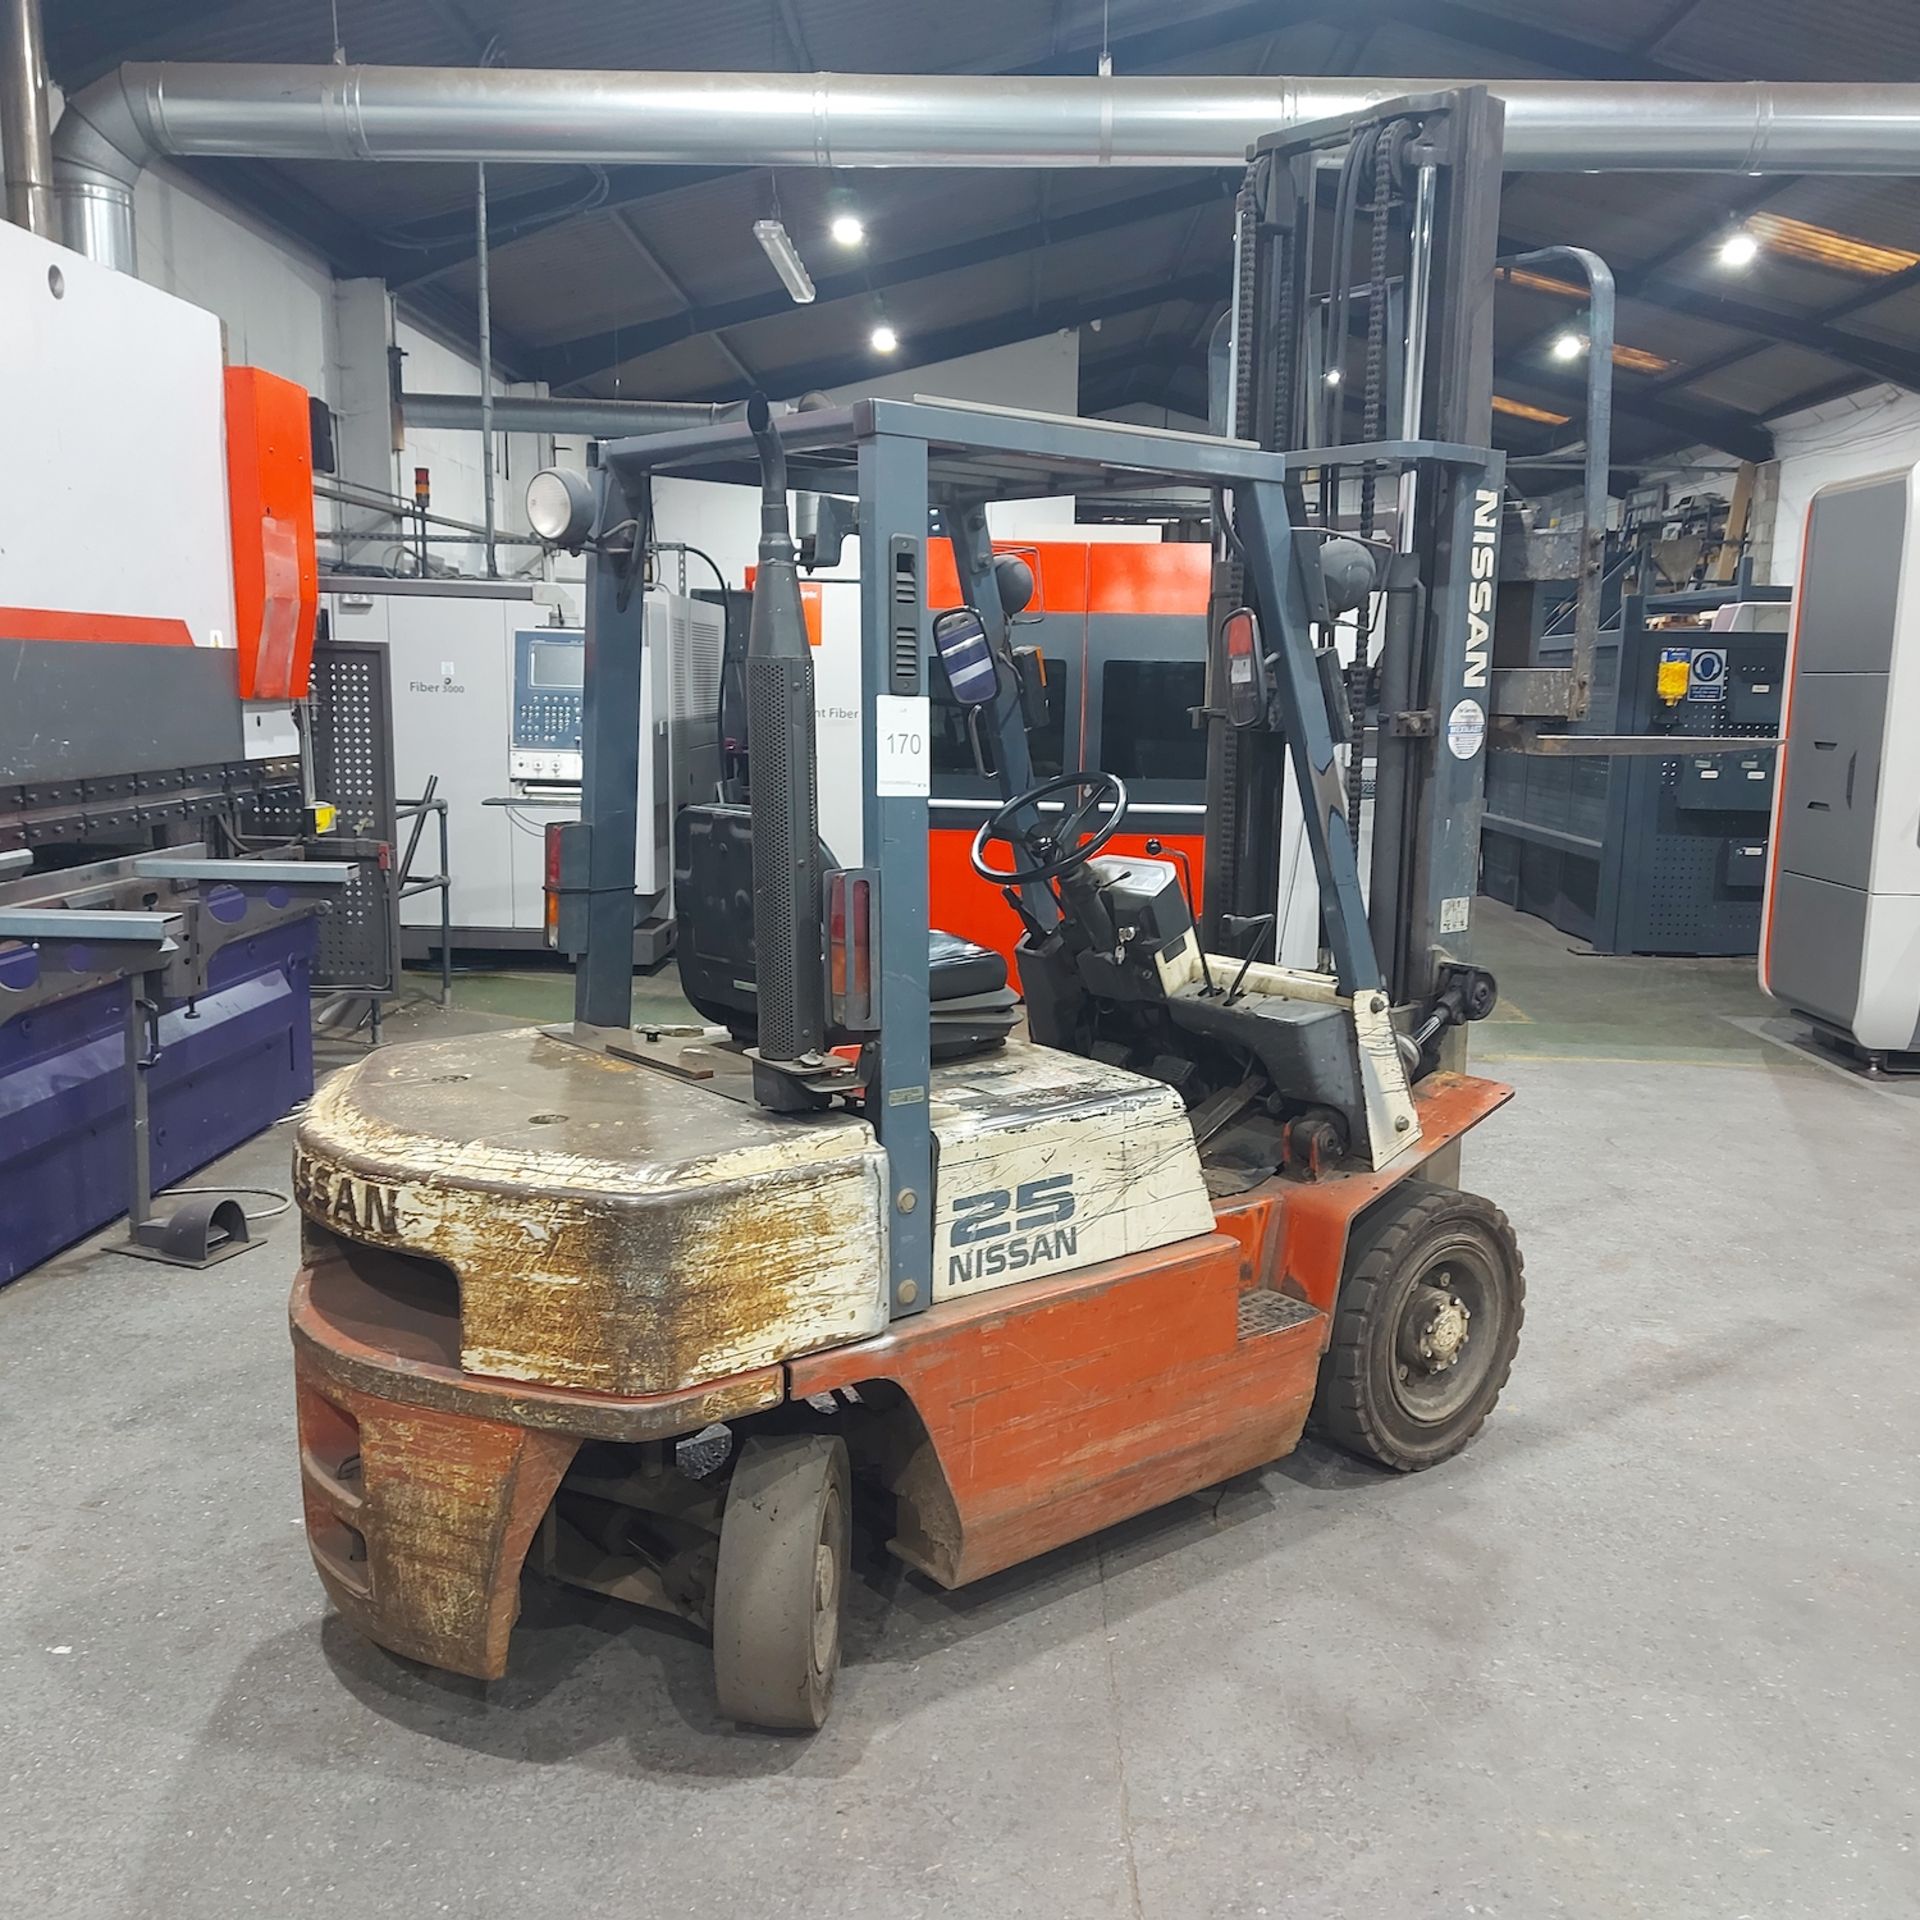 Nissan 25 2500Kg Diesel Forklift (please note this may not be removed until last day of clearance) - Image 2 of 2